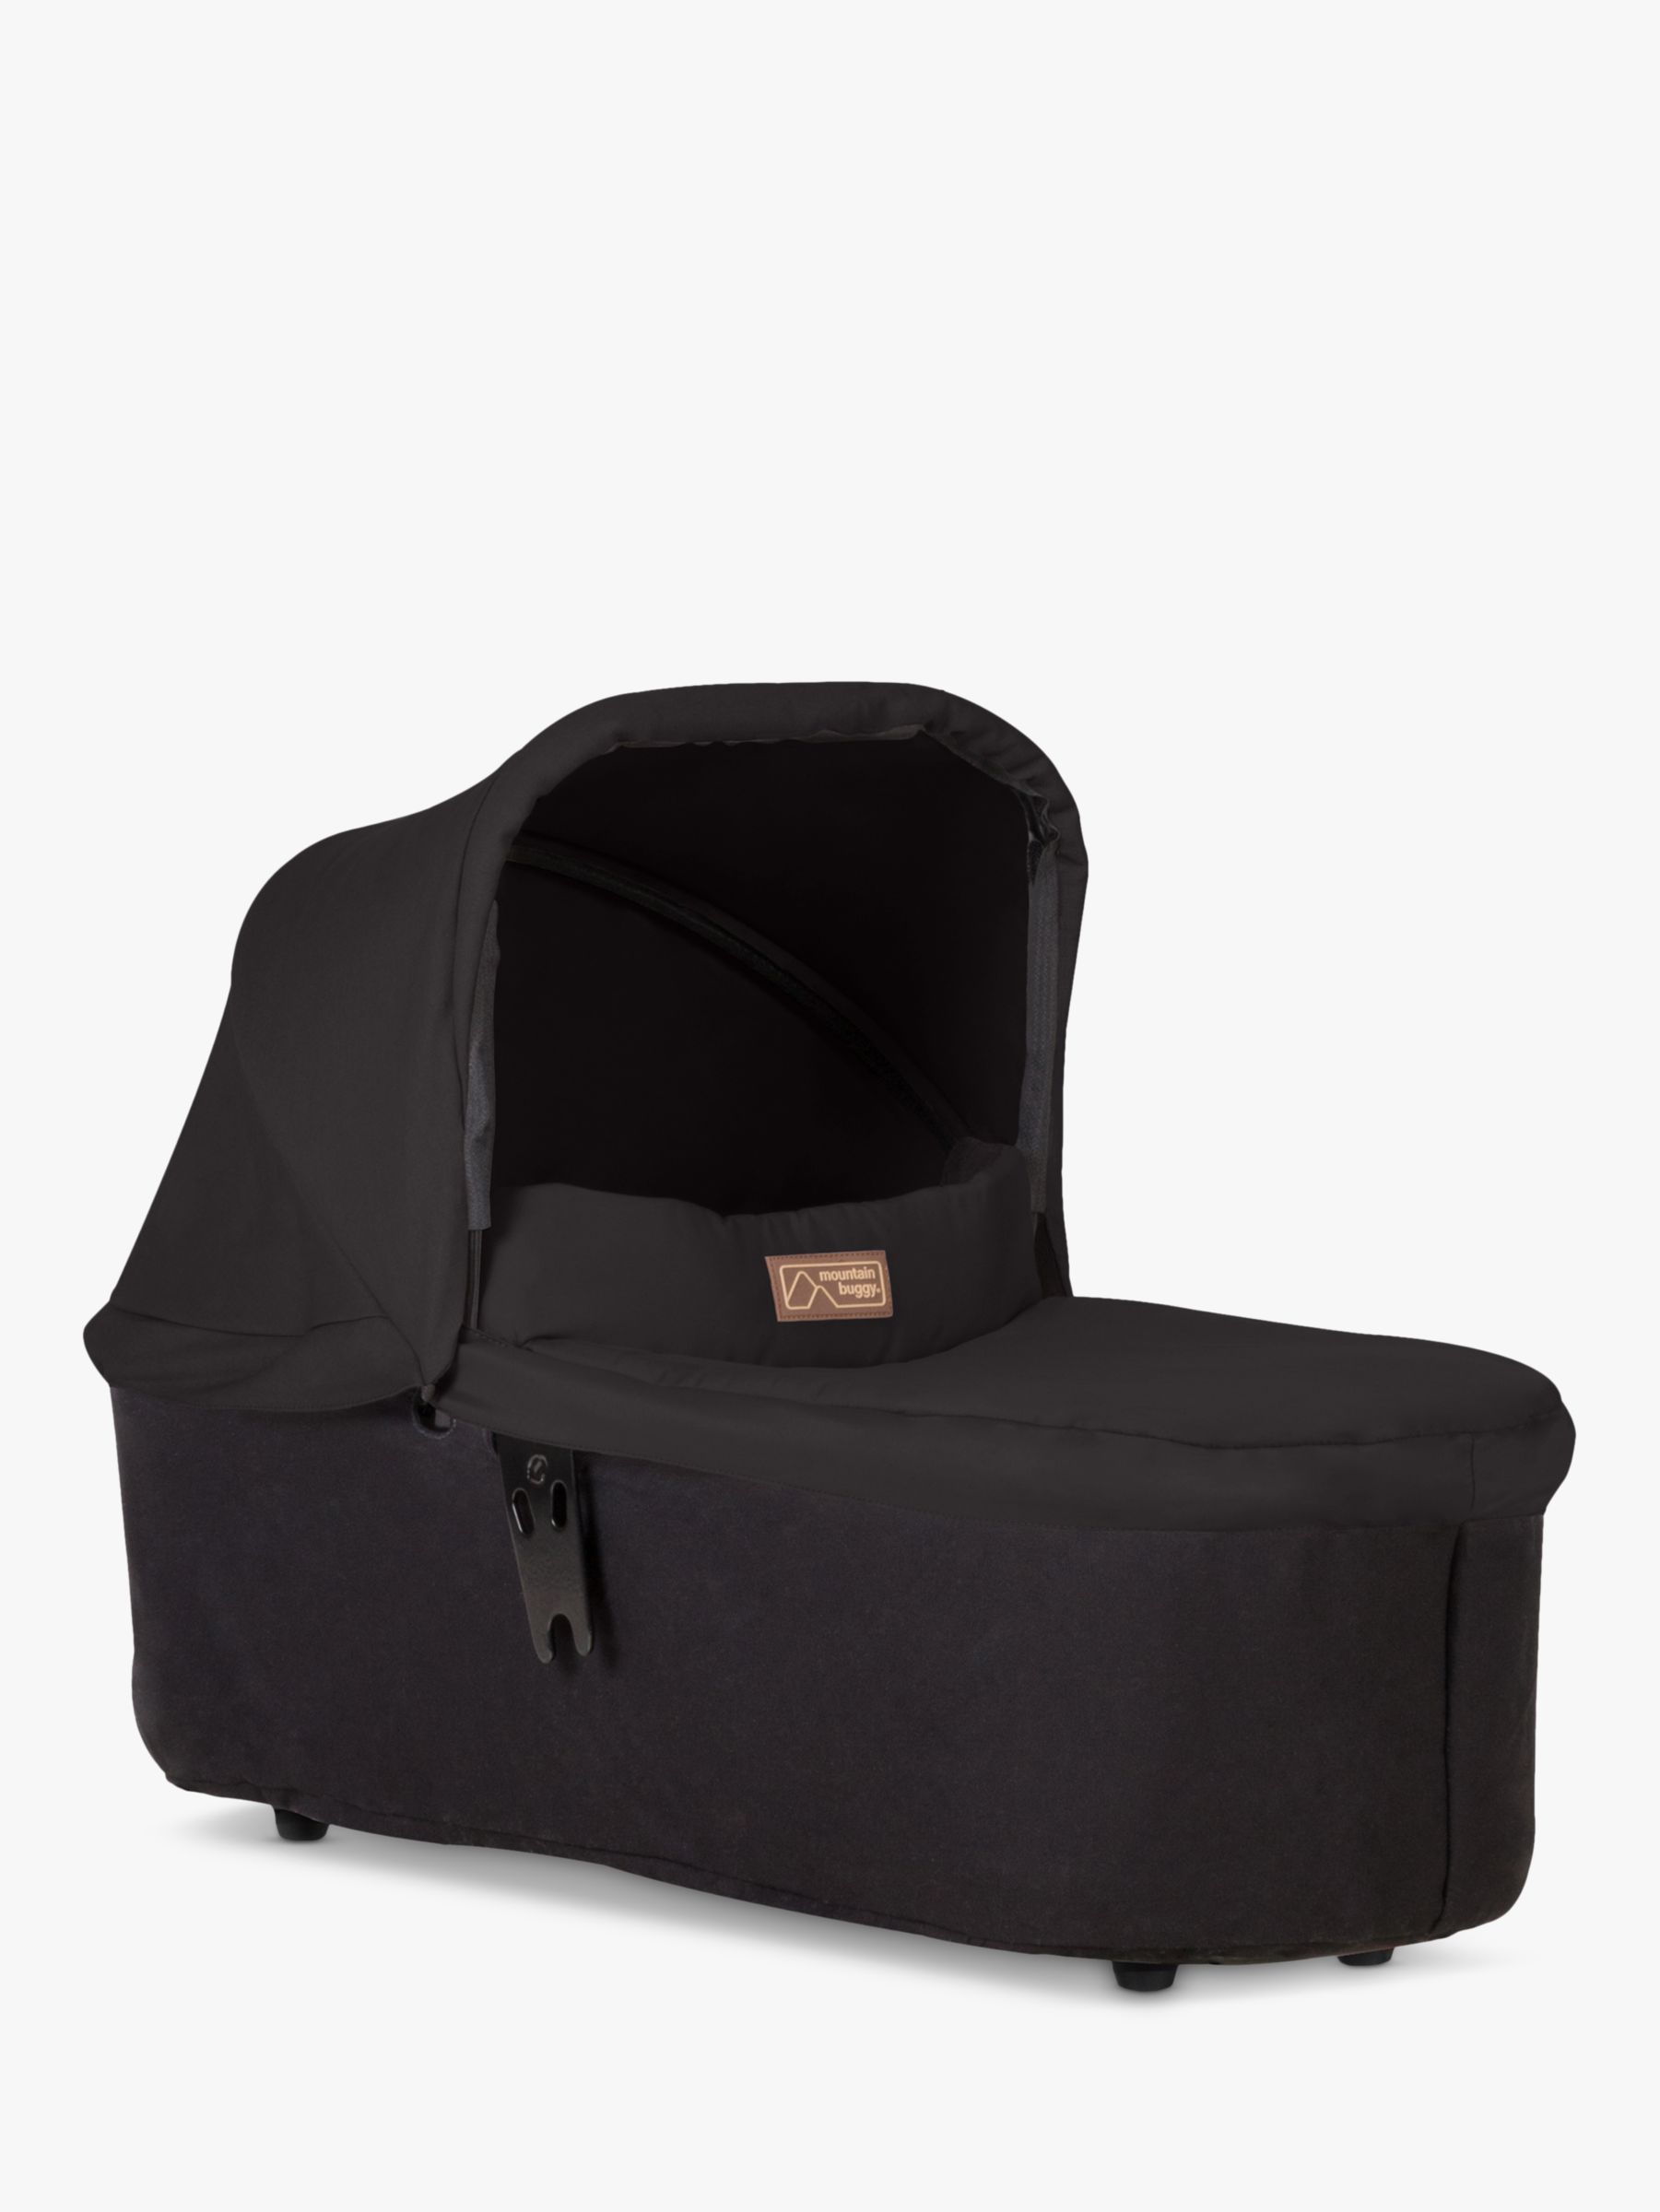 mountain buggy carrycot plus review